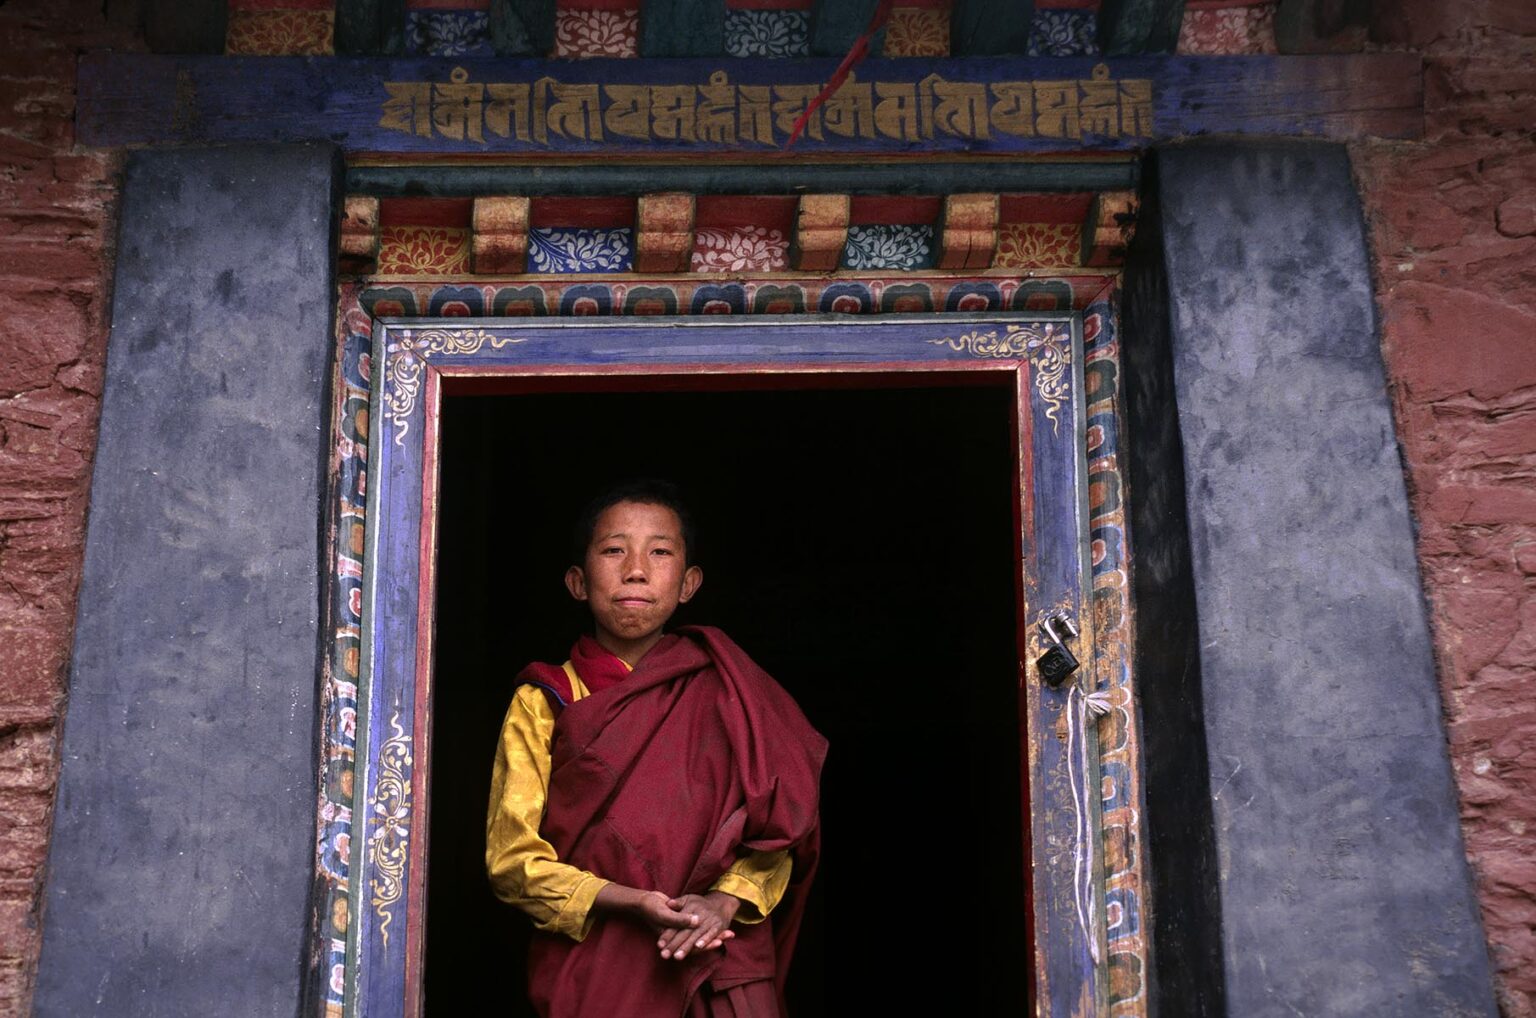 BUDDHIST MONK at TRANDRUK TEMPLE which was founded by KING SONGTSEN GAMPO in the 7TH Century - YARLUNG VALLEY, TIBET